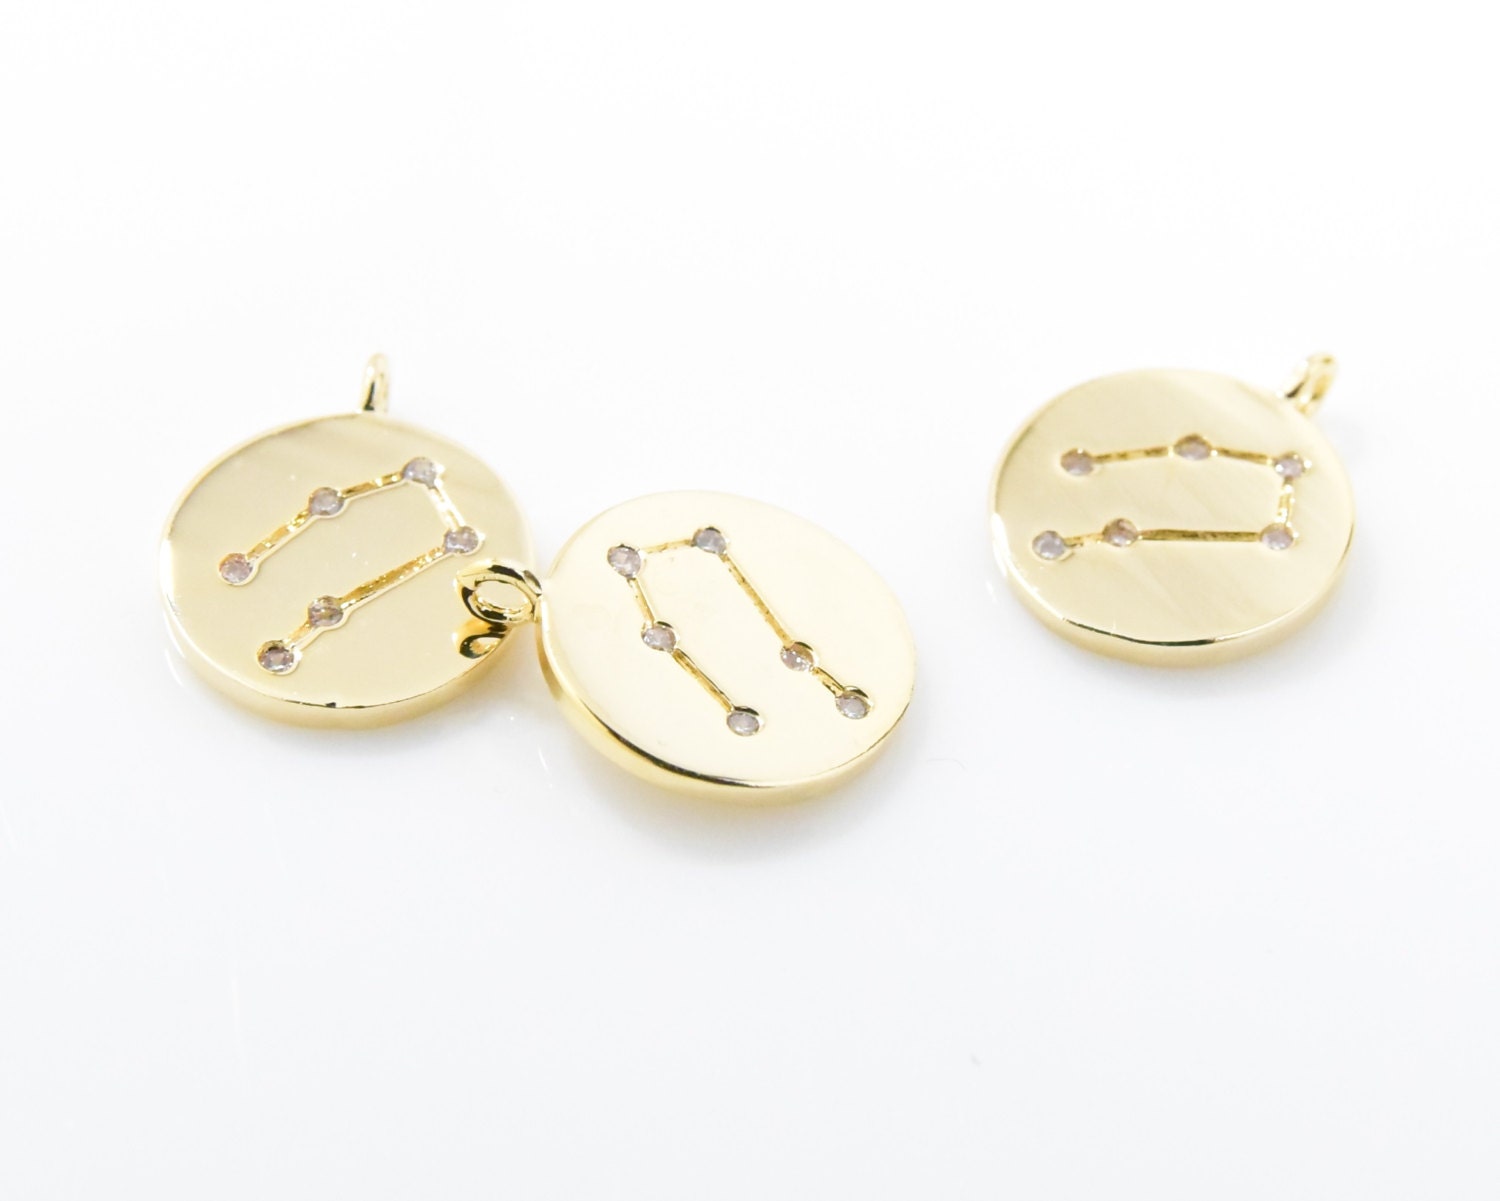 Gemini . The Twins Cubic Constellation Pendant Zodiac Sign 16K Polished Gold Plated Over Brass - 2Pcs/Ia0186-Pg